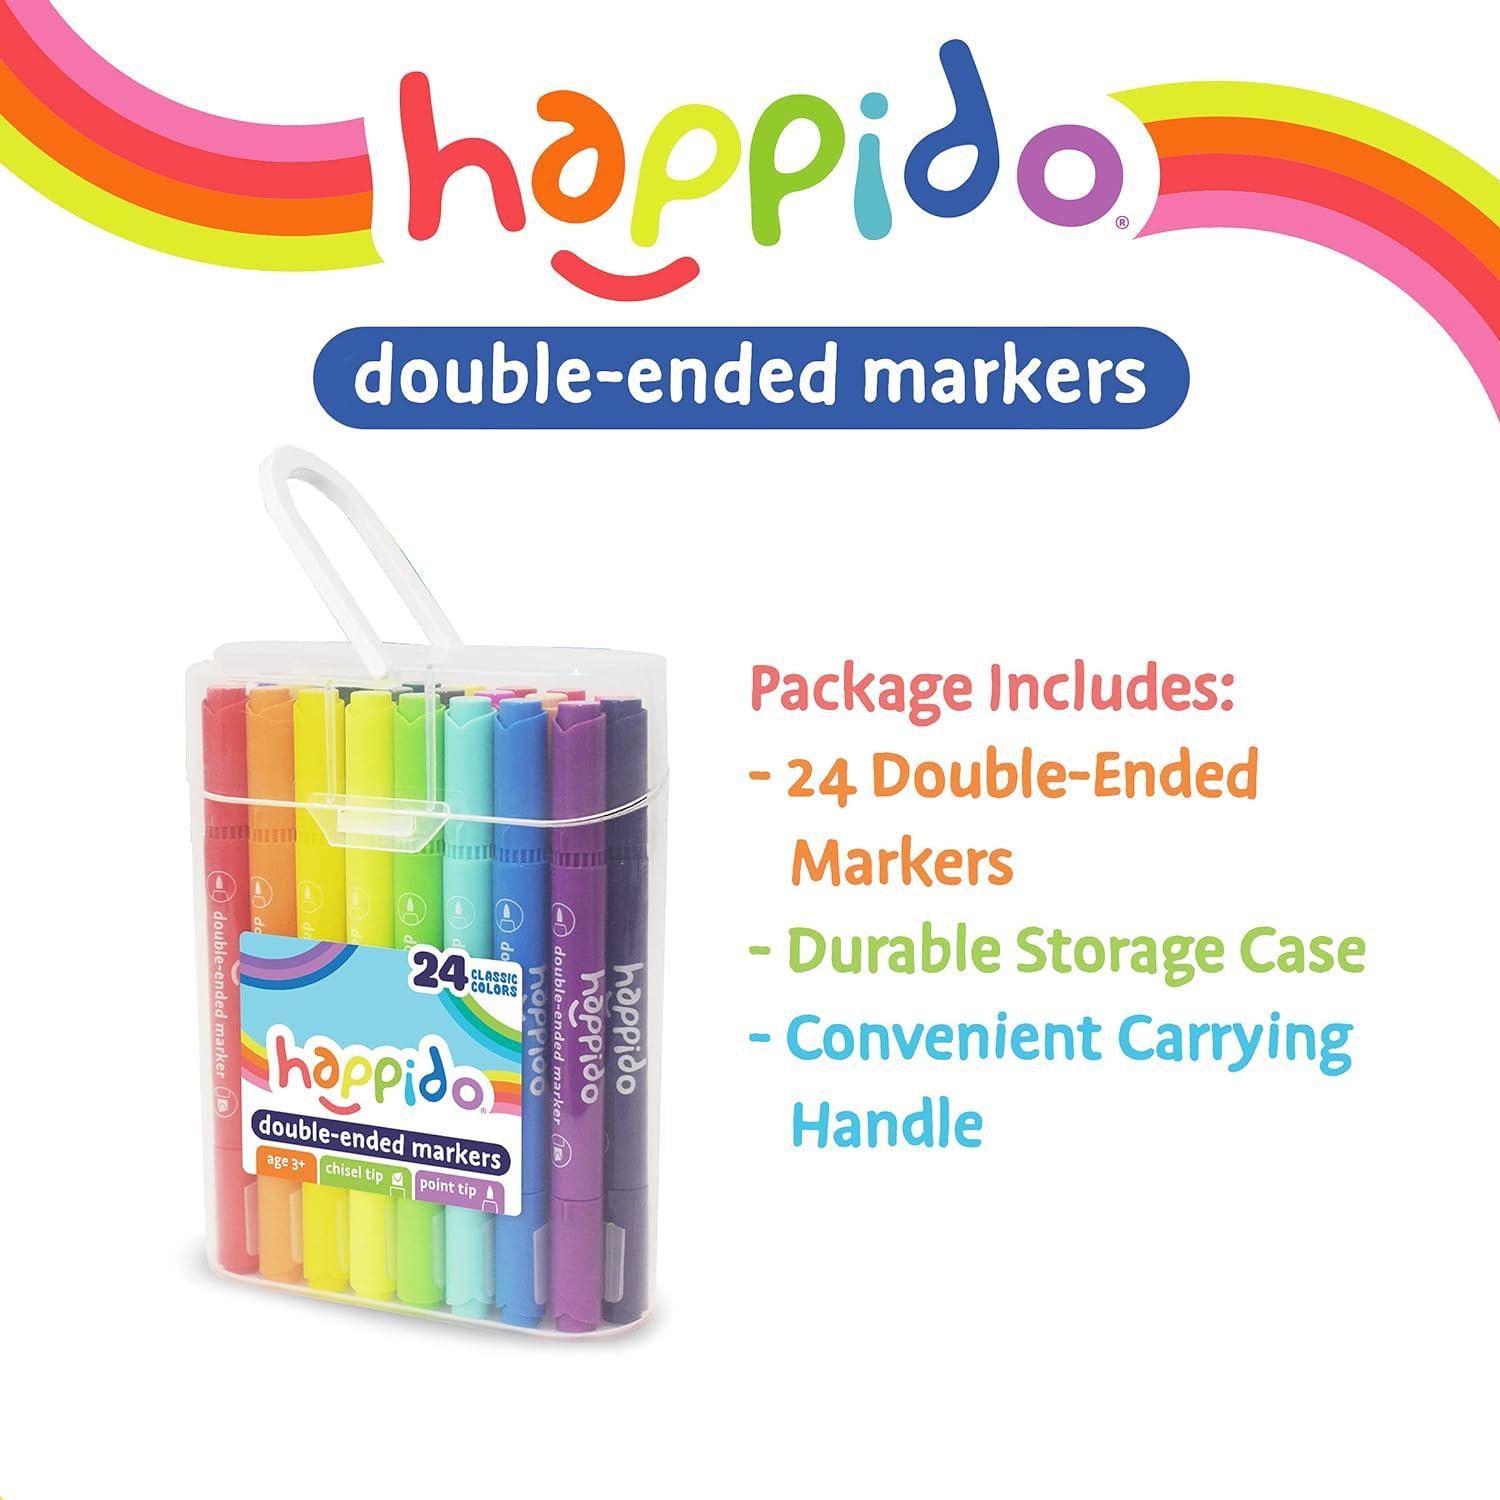 Happido Double-Ended Markers, 36 Colors - Non-Toxic, Brightly